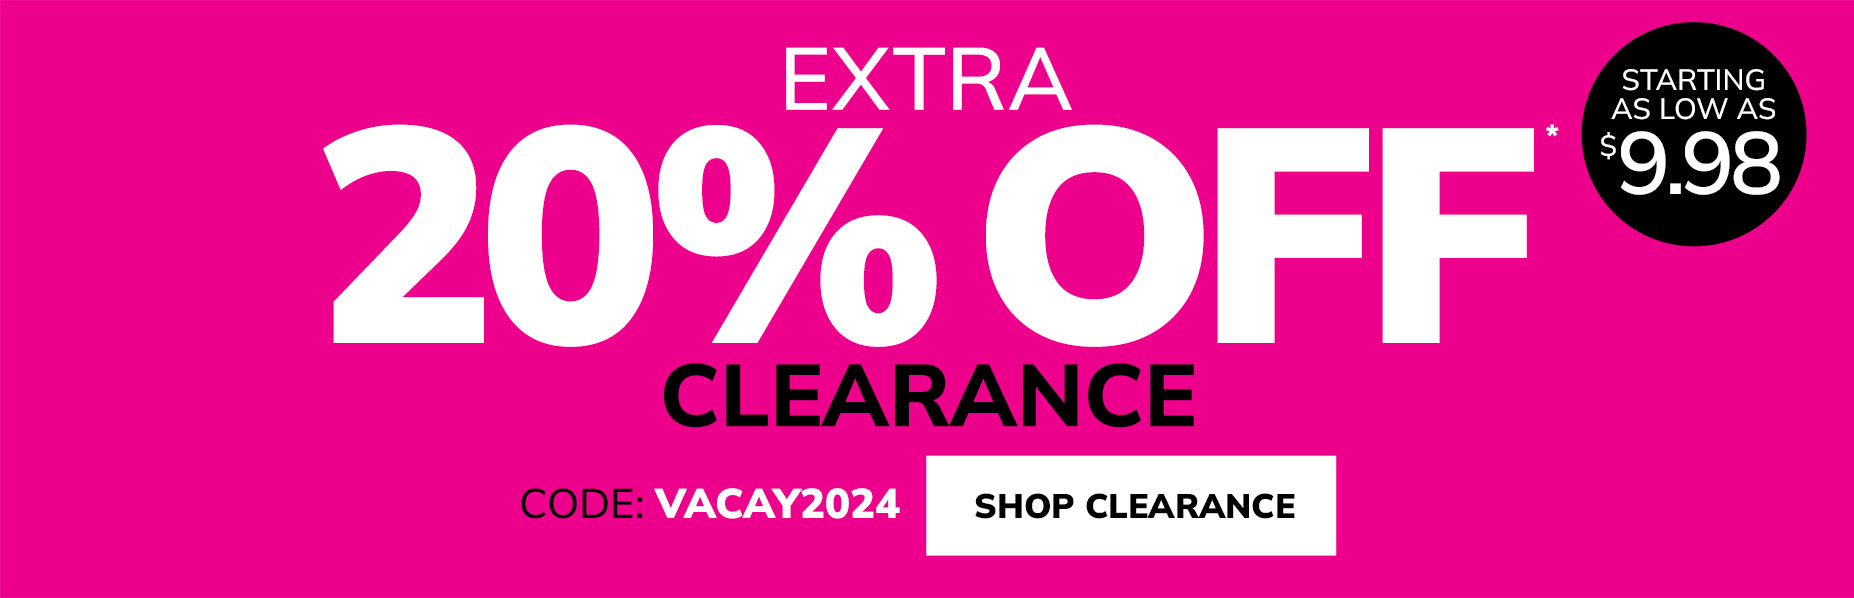 new clearance markdowns upto 75% off